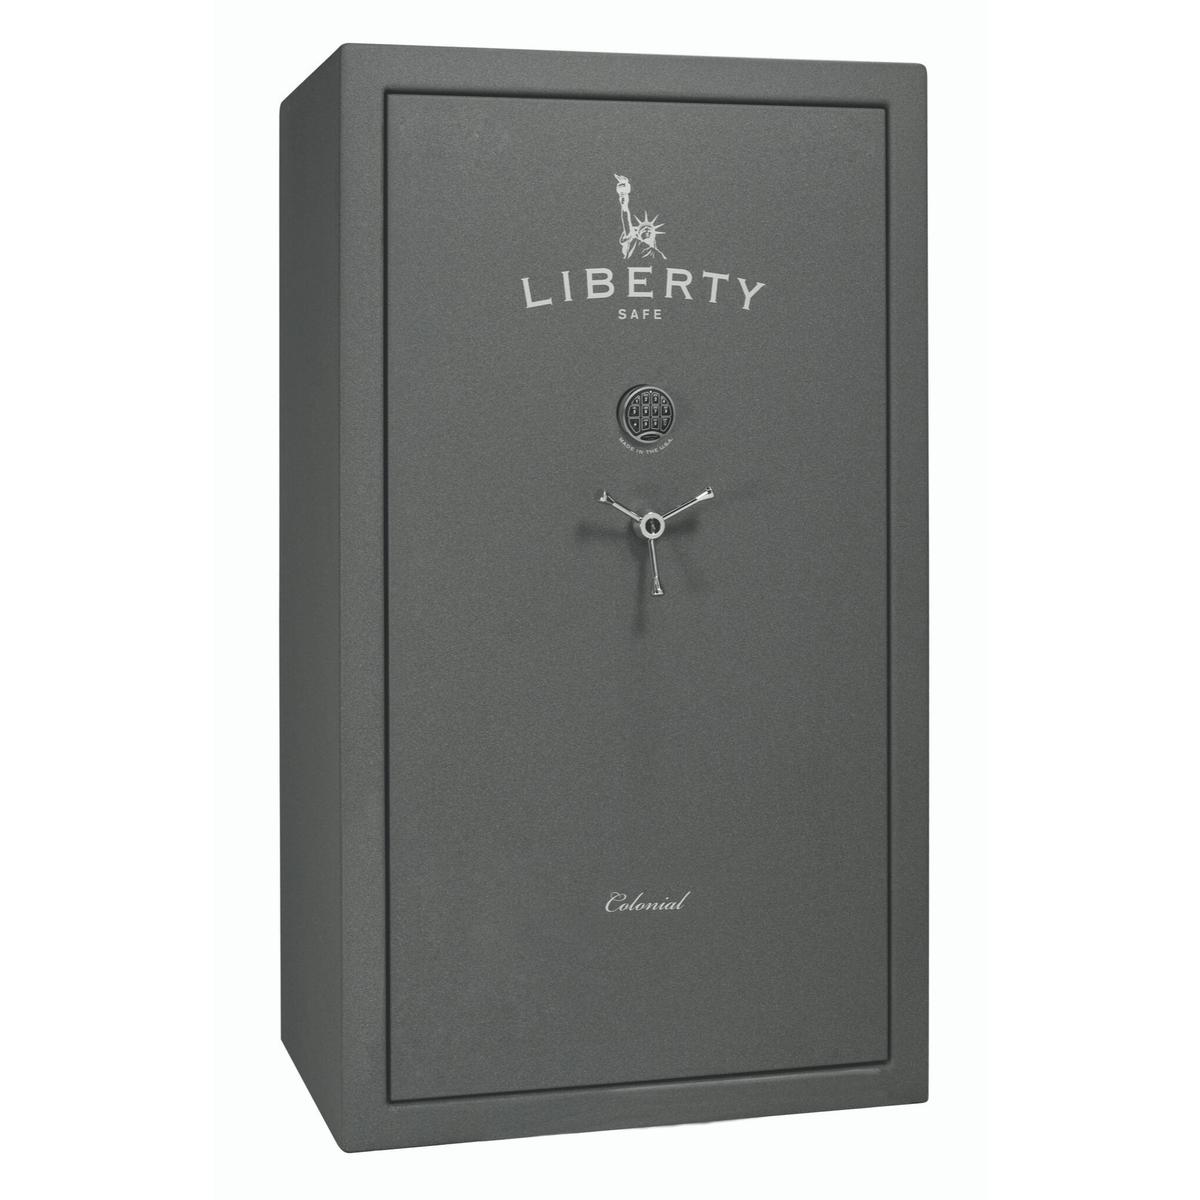 Liberty Colonial 50 Safe in Textured Granite with Chrome Electronic Lock.